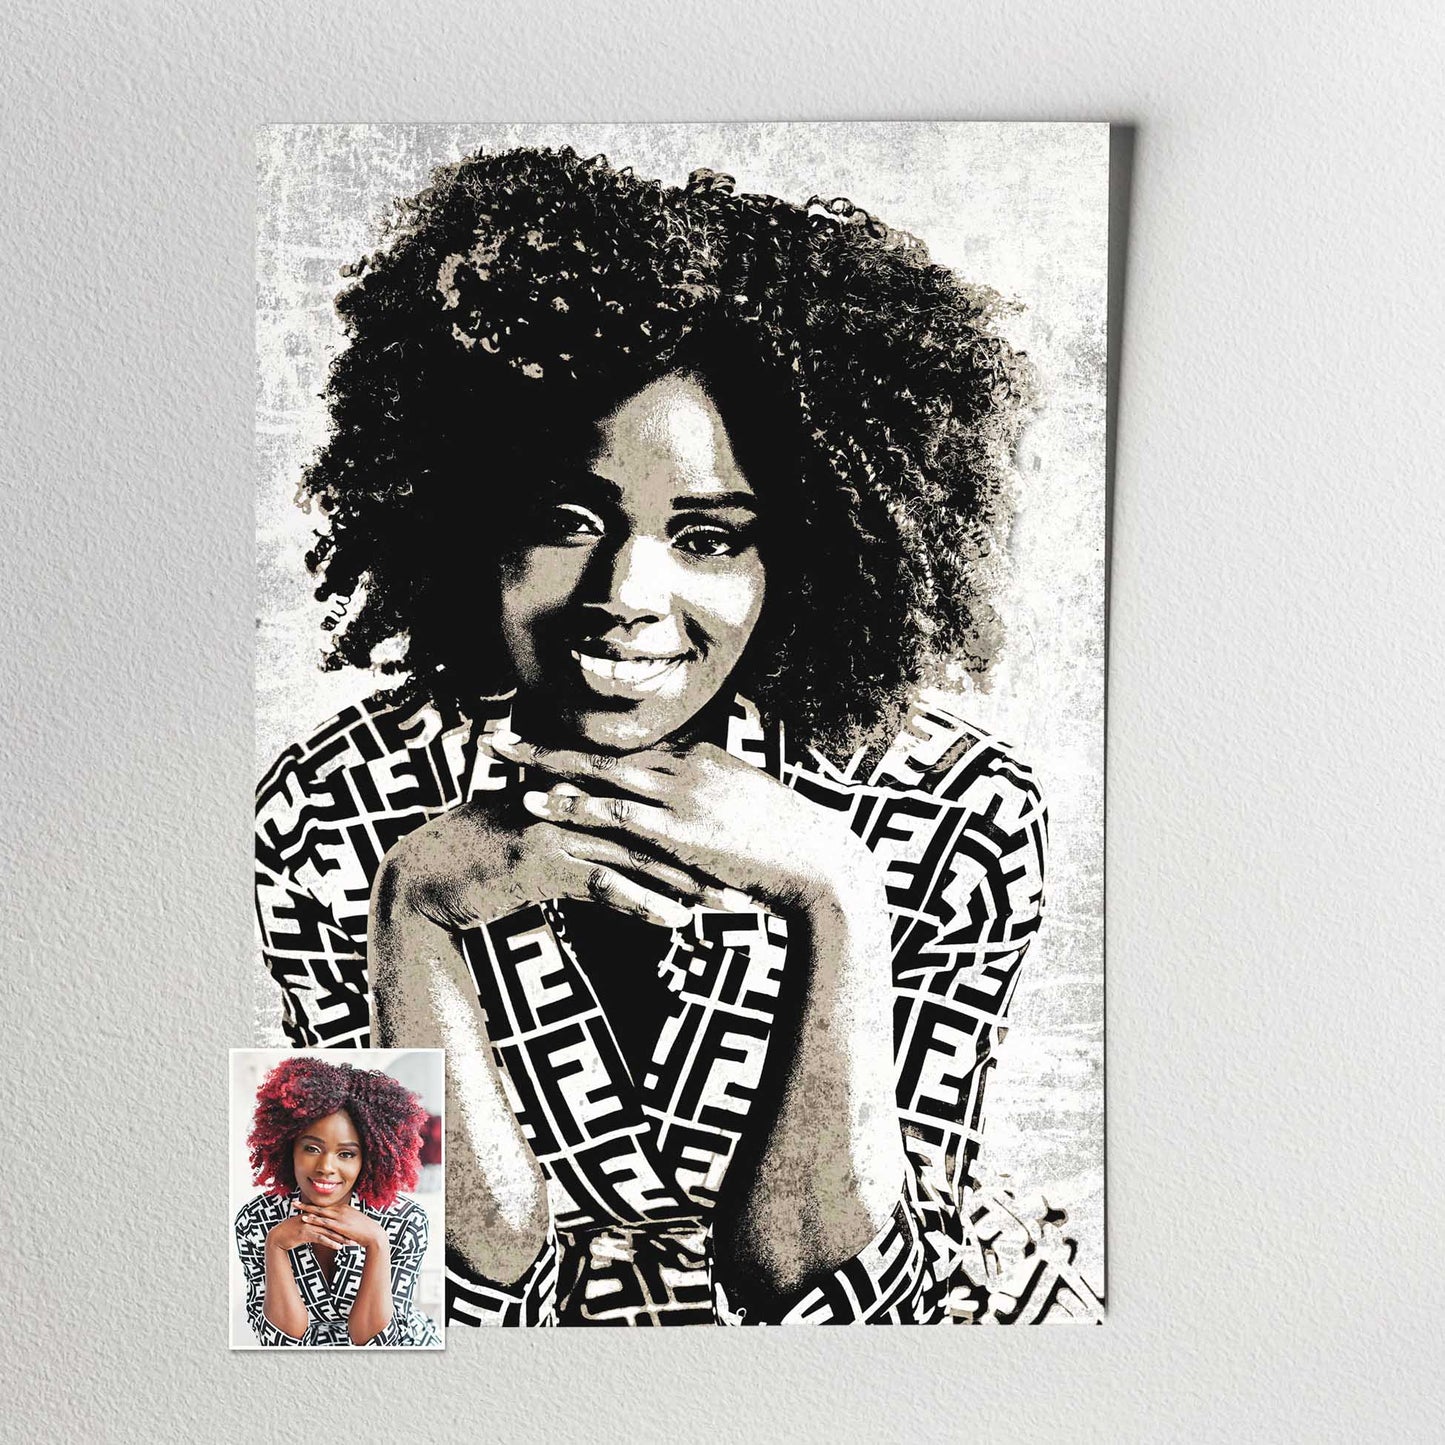 Unleash your creativity with Personalised Black & White Street Art Prints, featuring a captivating graffiti street art effect. The urban coolness merges flawlessly with minimalist elegance, resulting in a clean and sharp design 